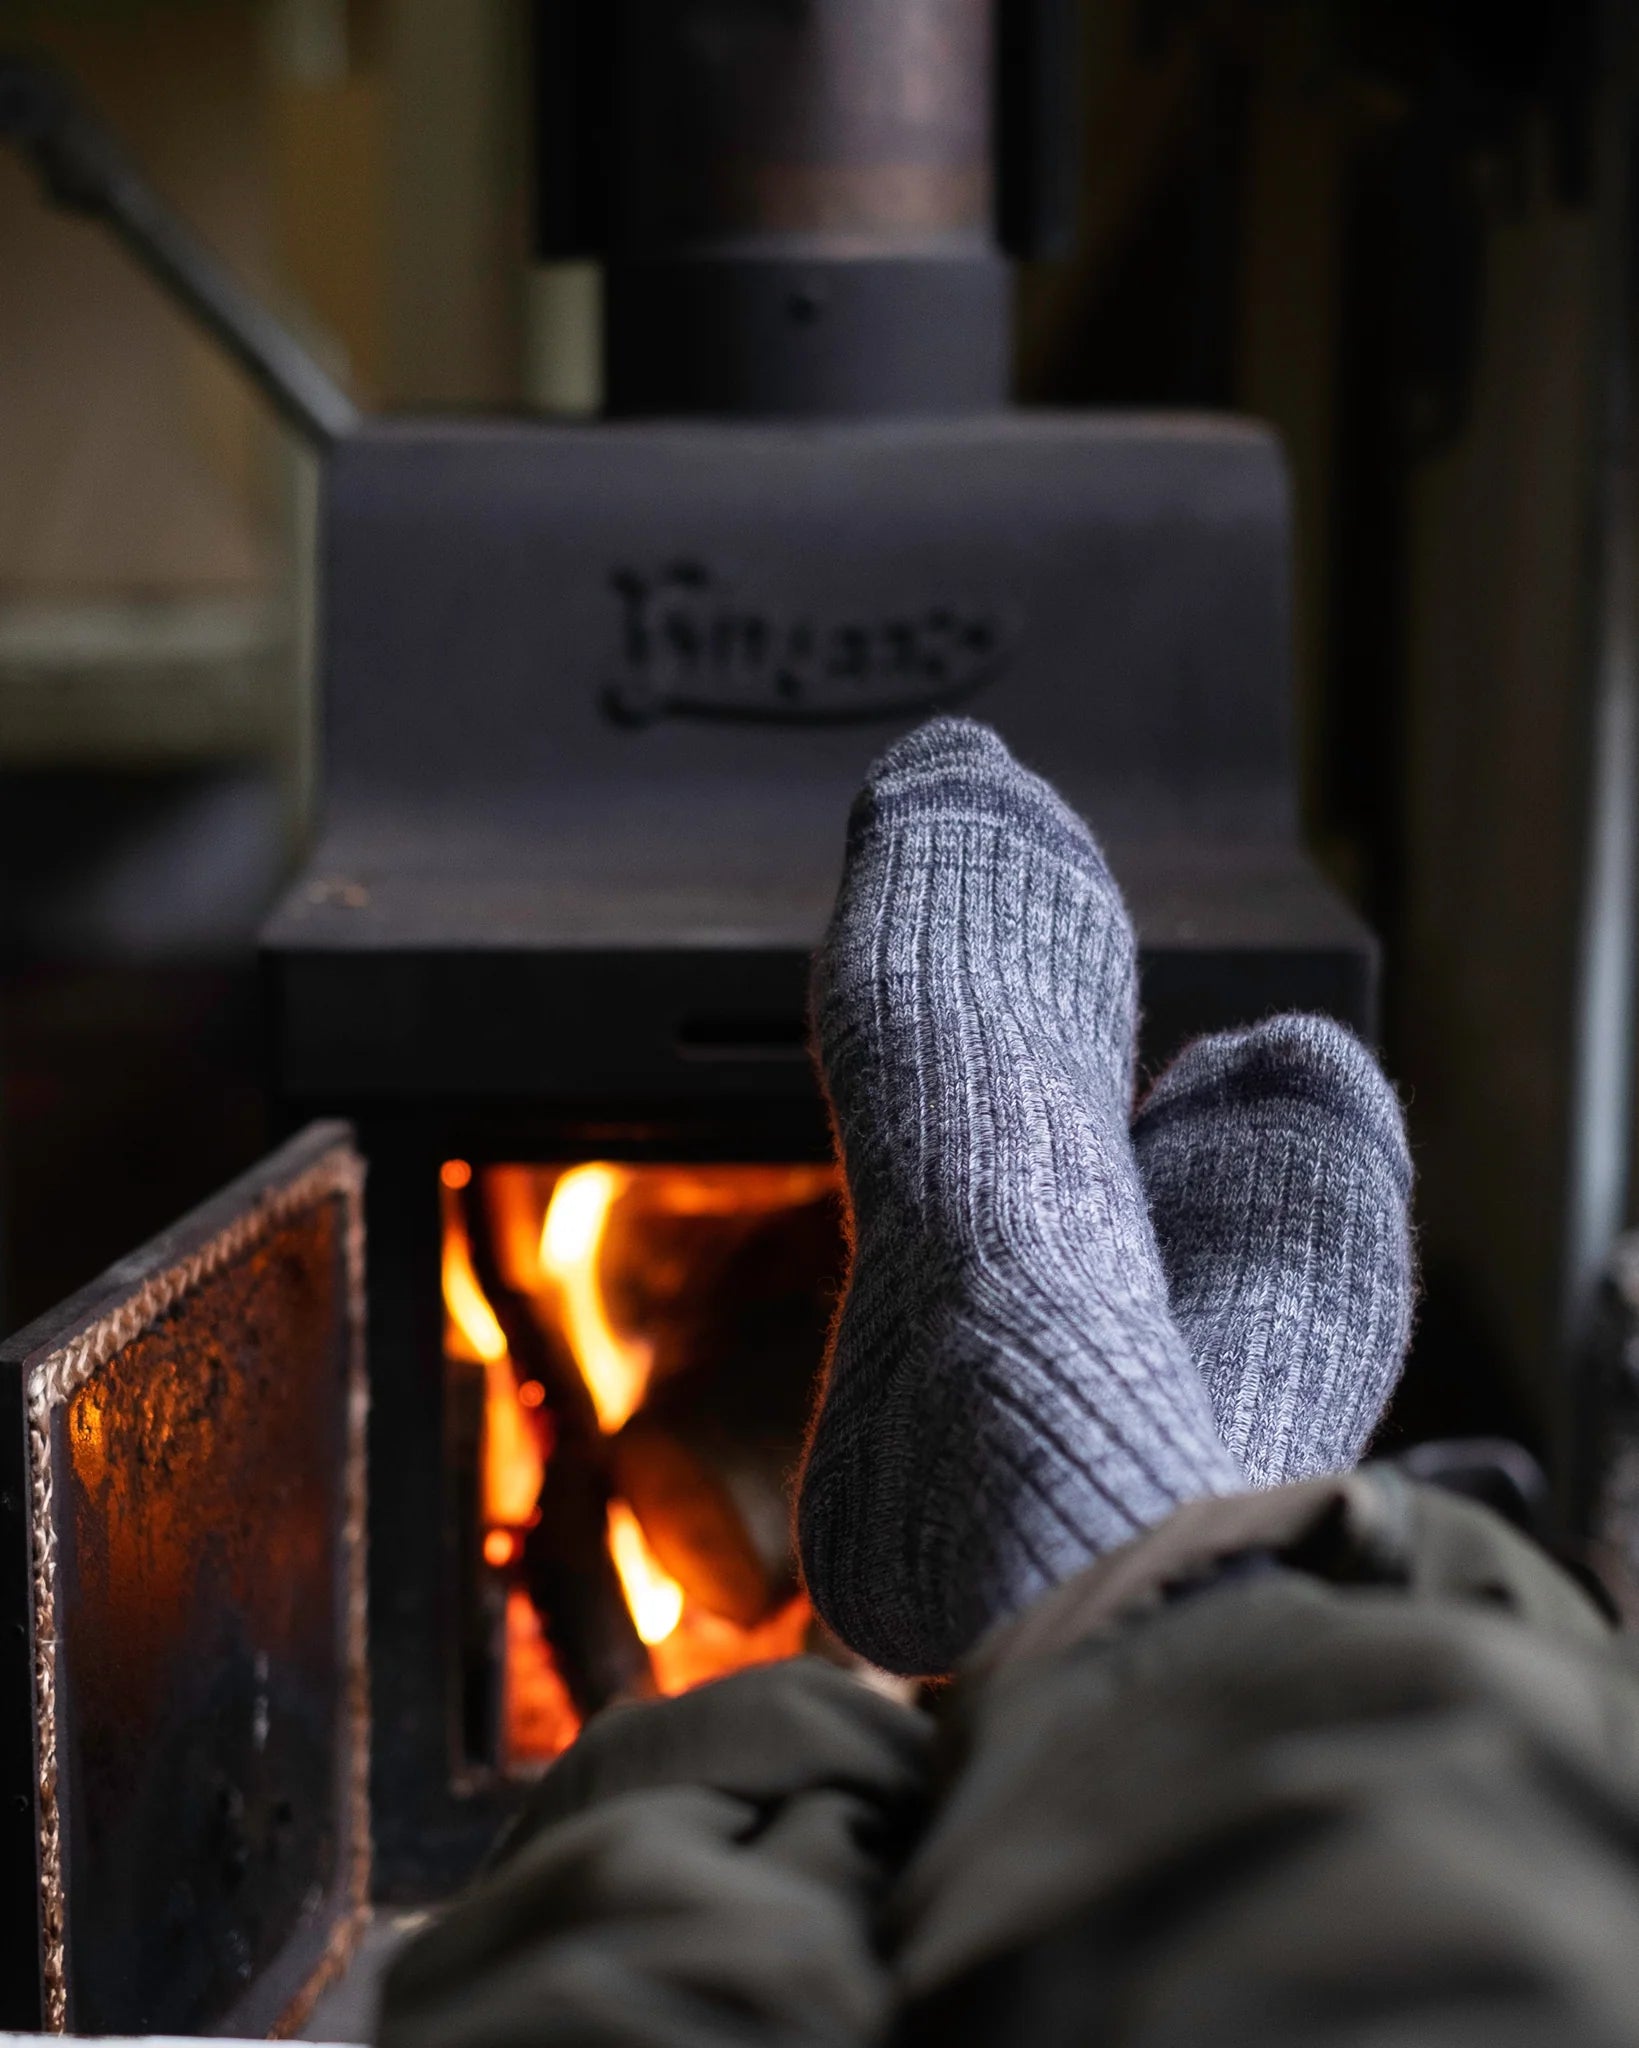 Cozy moments: warming up by the crackling wood stove with toasty, sustainably produced Pretty Fly merino wool socks.